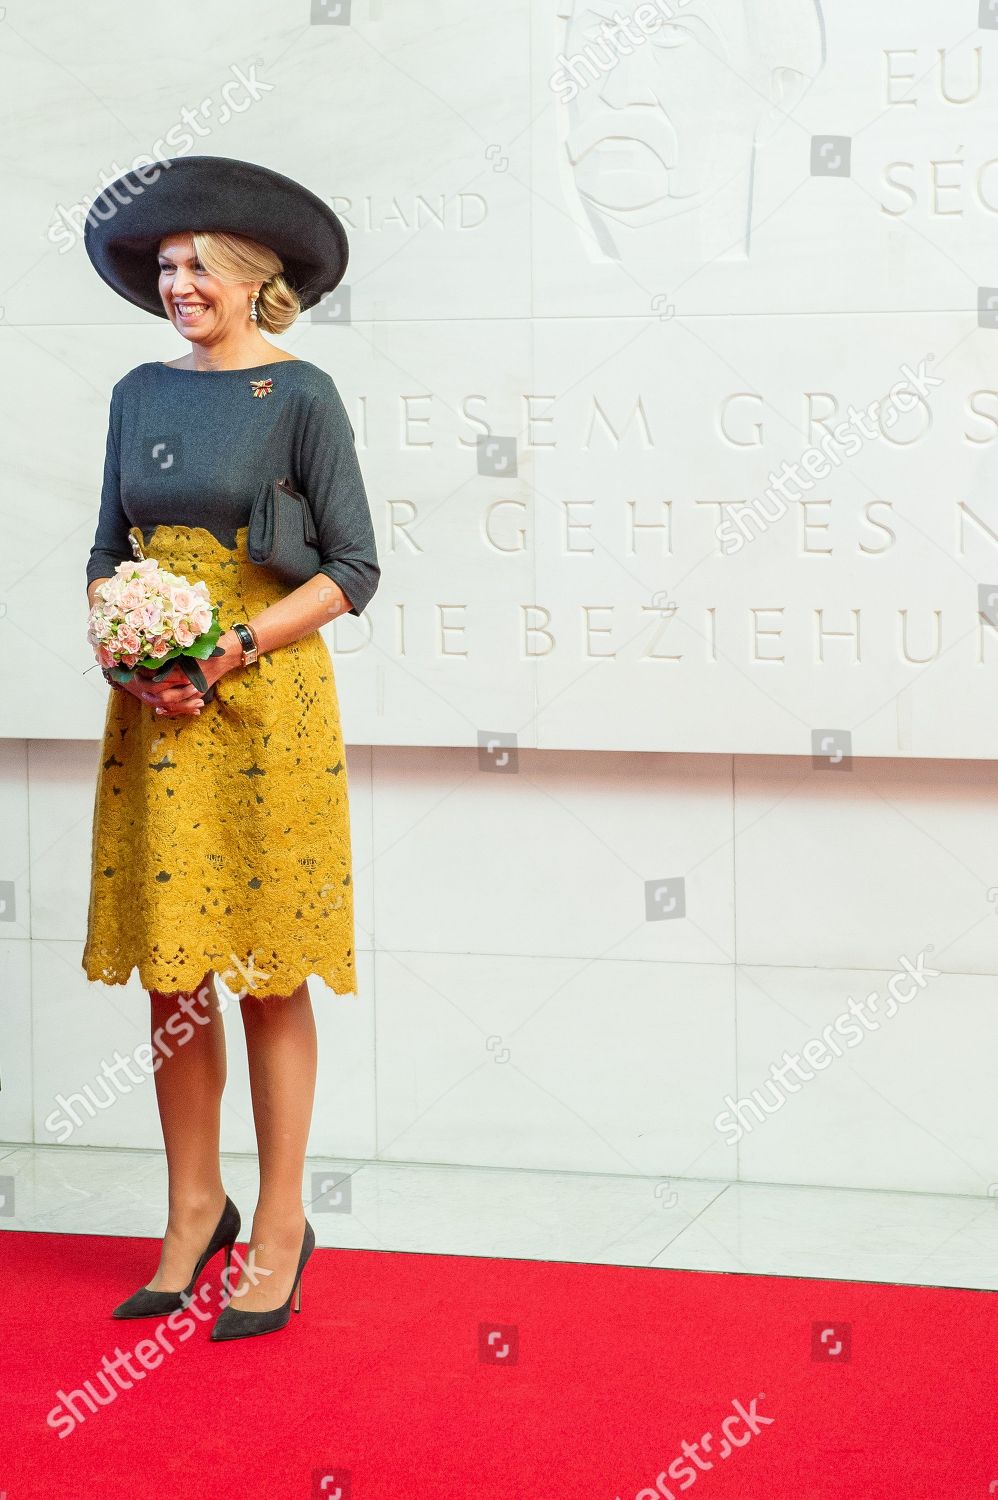 king-willem-alexander-and-queen-maxima-visit-to-germany-shutterstock-editorial-9921325t.jpg